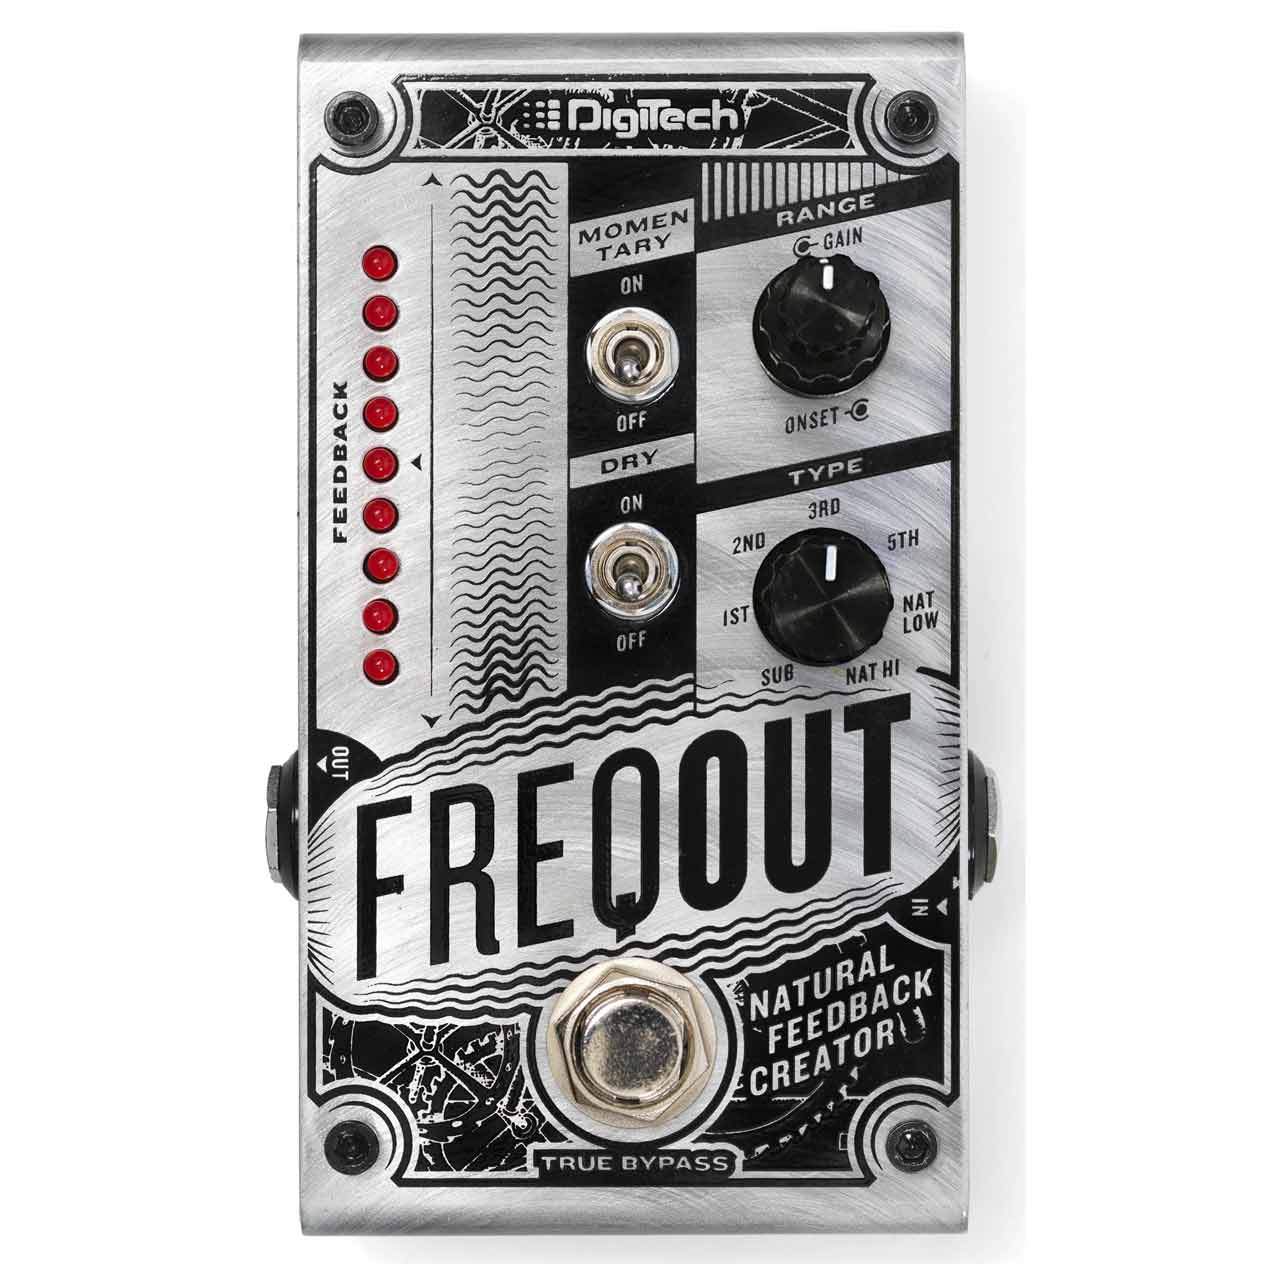 Pedals & Effects - DigiTech FreqOut Natural Feedback Creator Pedal